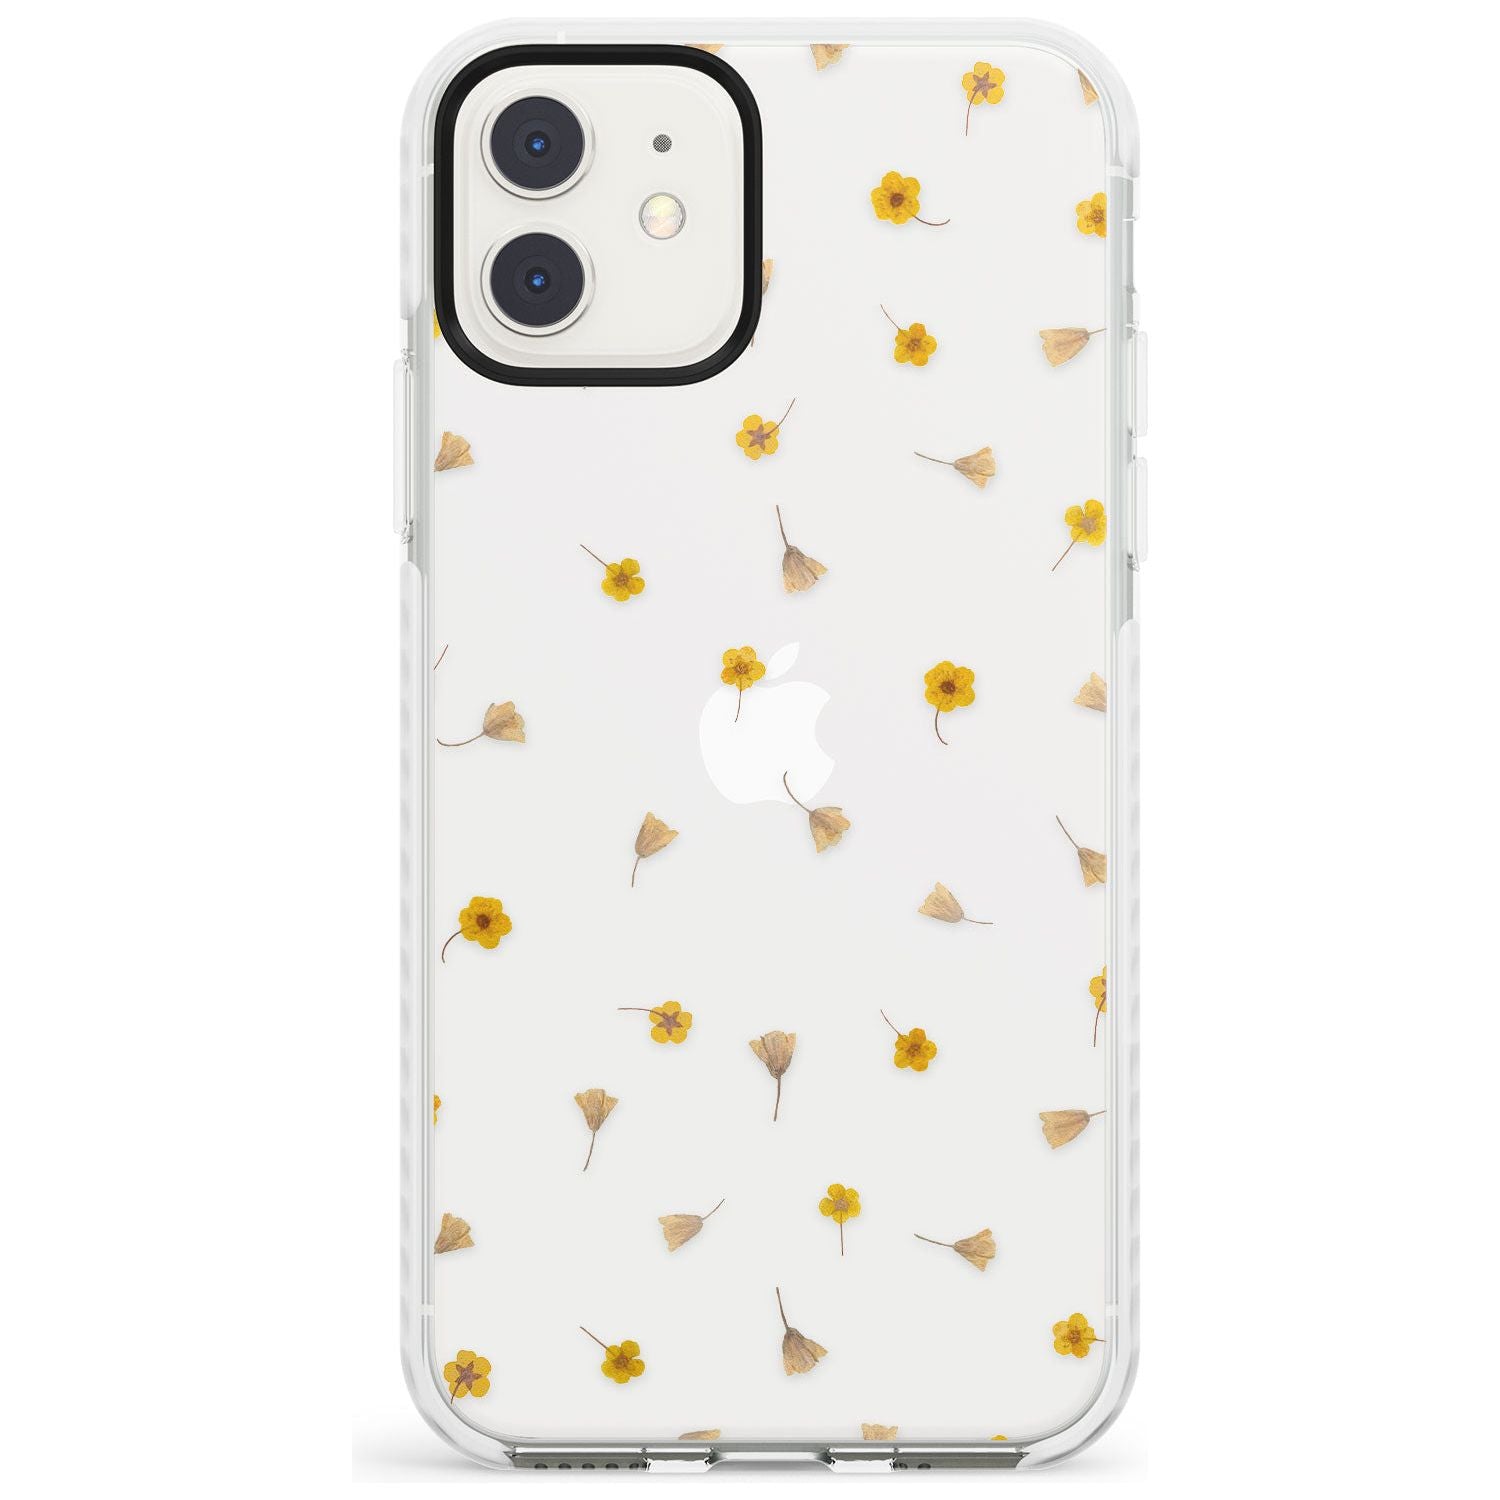 Small Flower Mix - Dried Flower-Inspired Design Impact Phone Case for iPhone 11